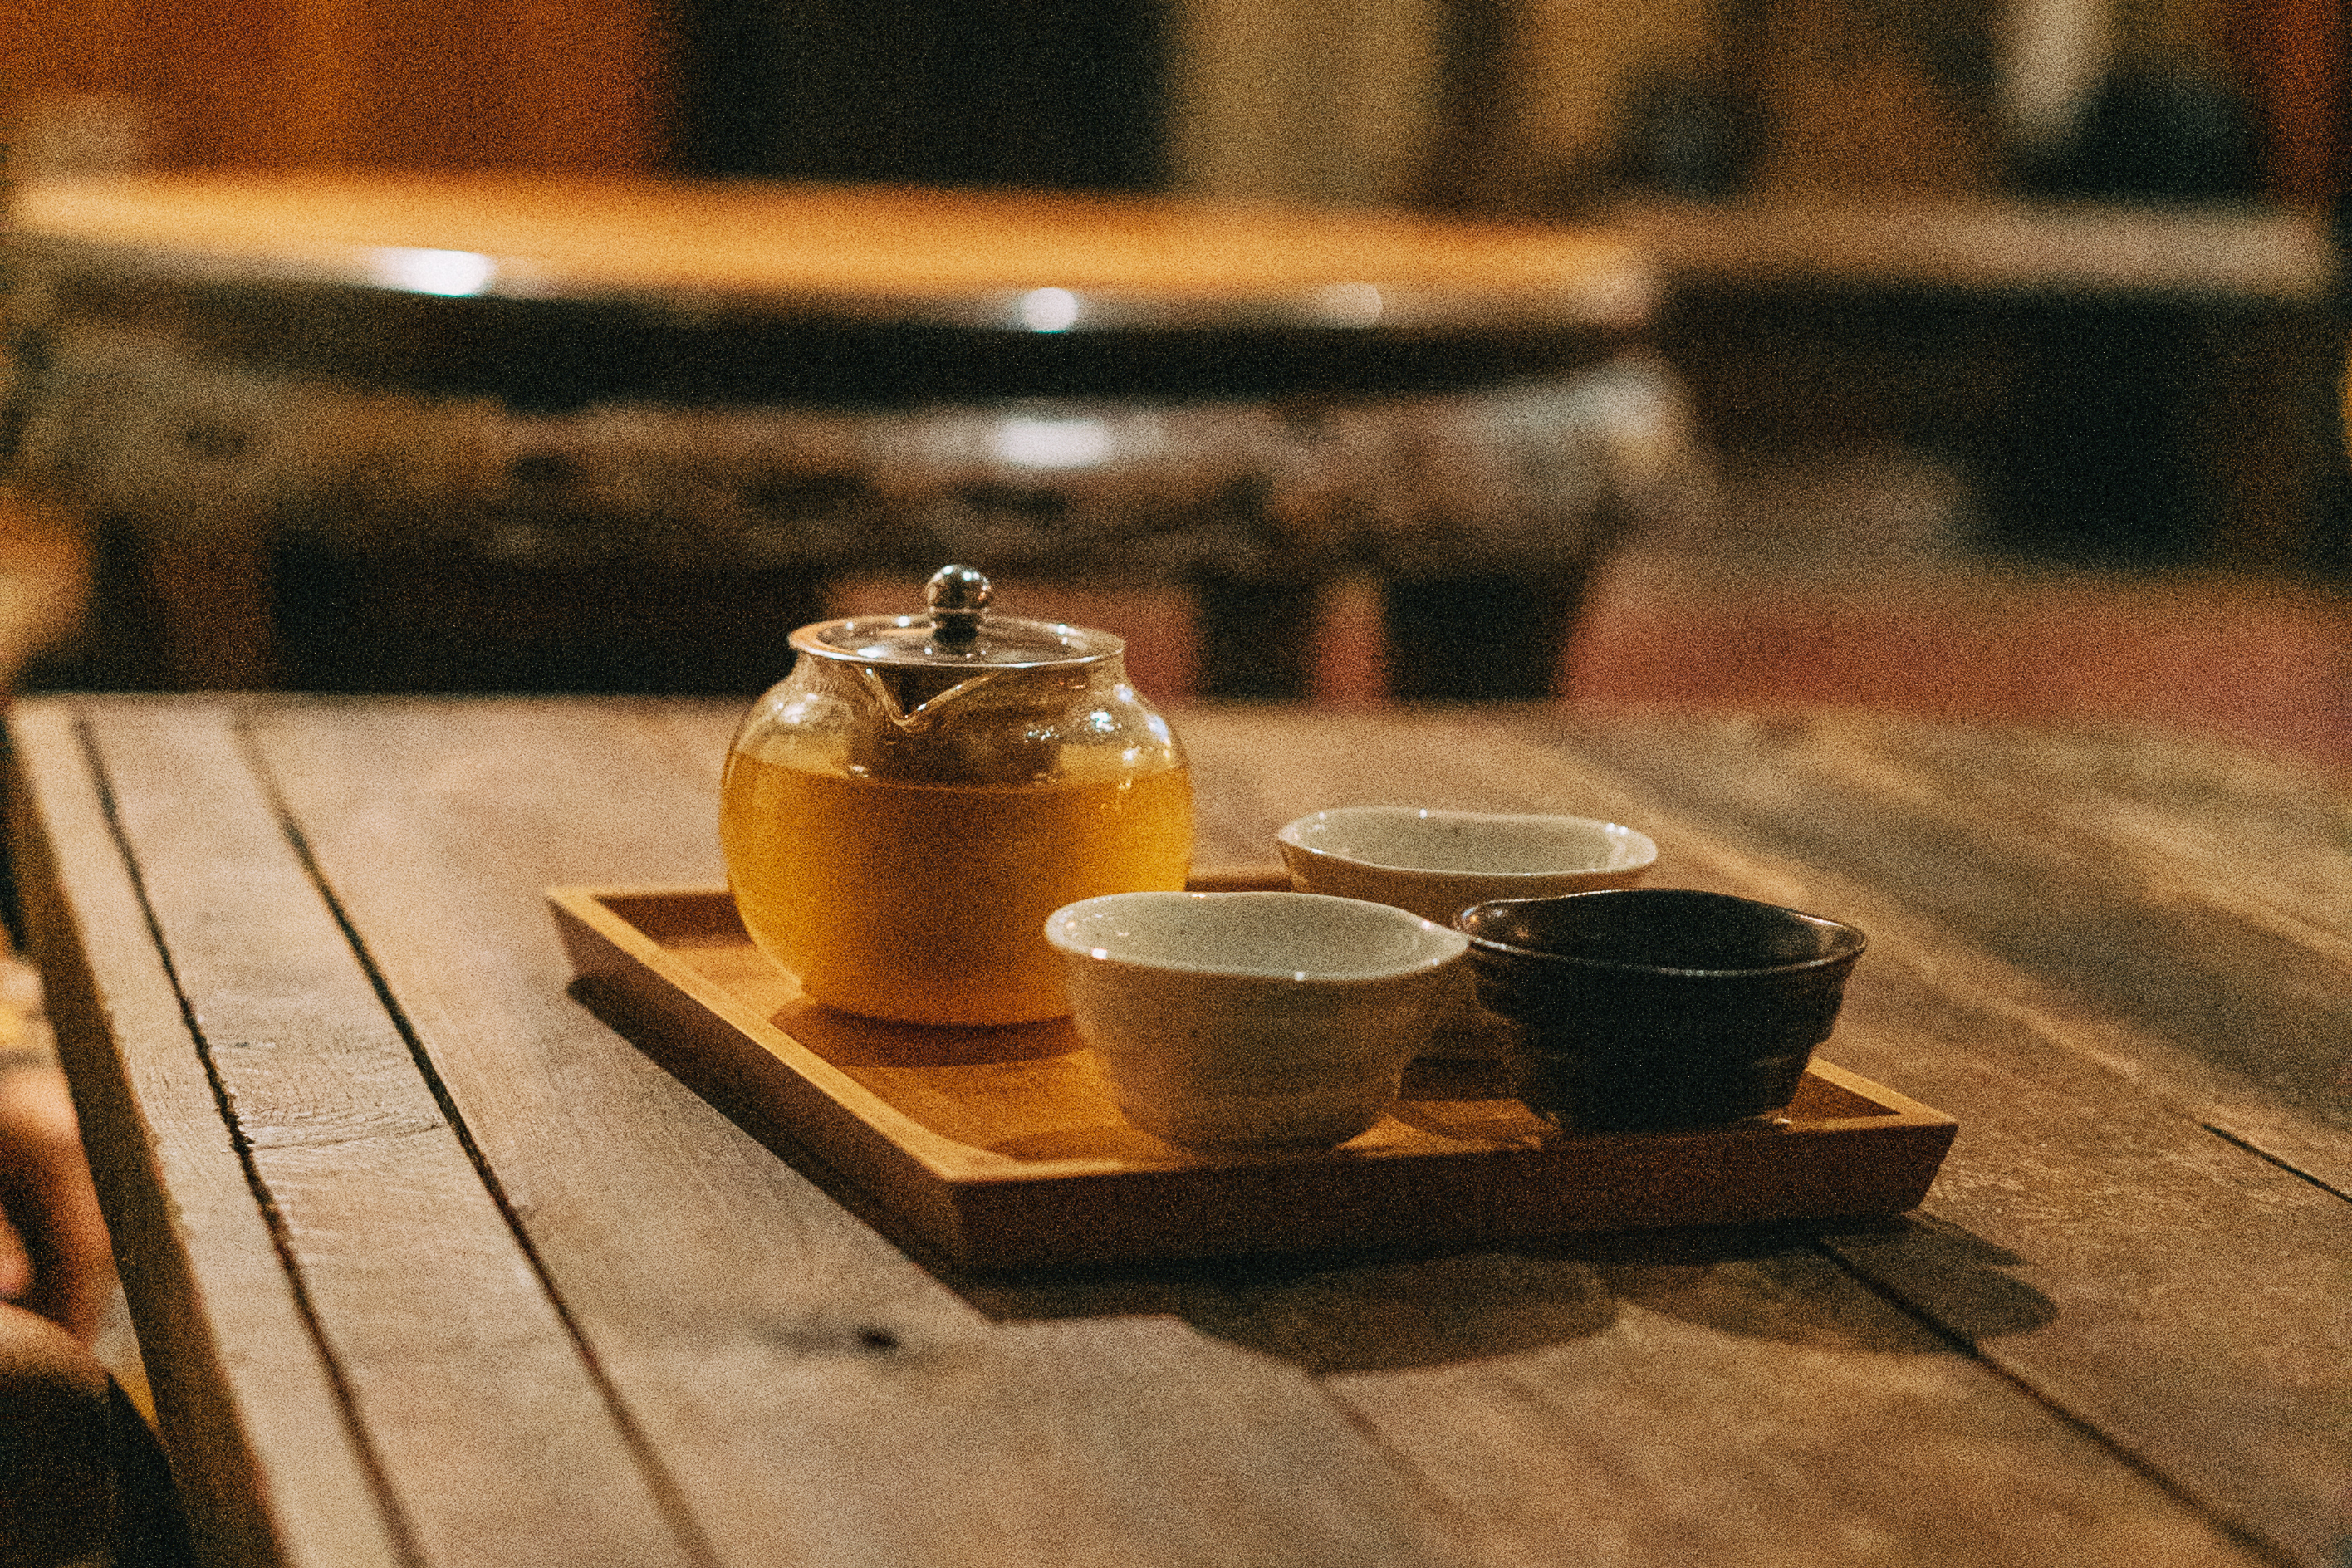 The image shows a glass teapot with a metal lid, filled with yellow tea, and three cups on a wooden tray placed on a rustic wooden table in a cozy, dimly lit setting.